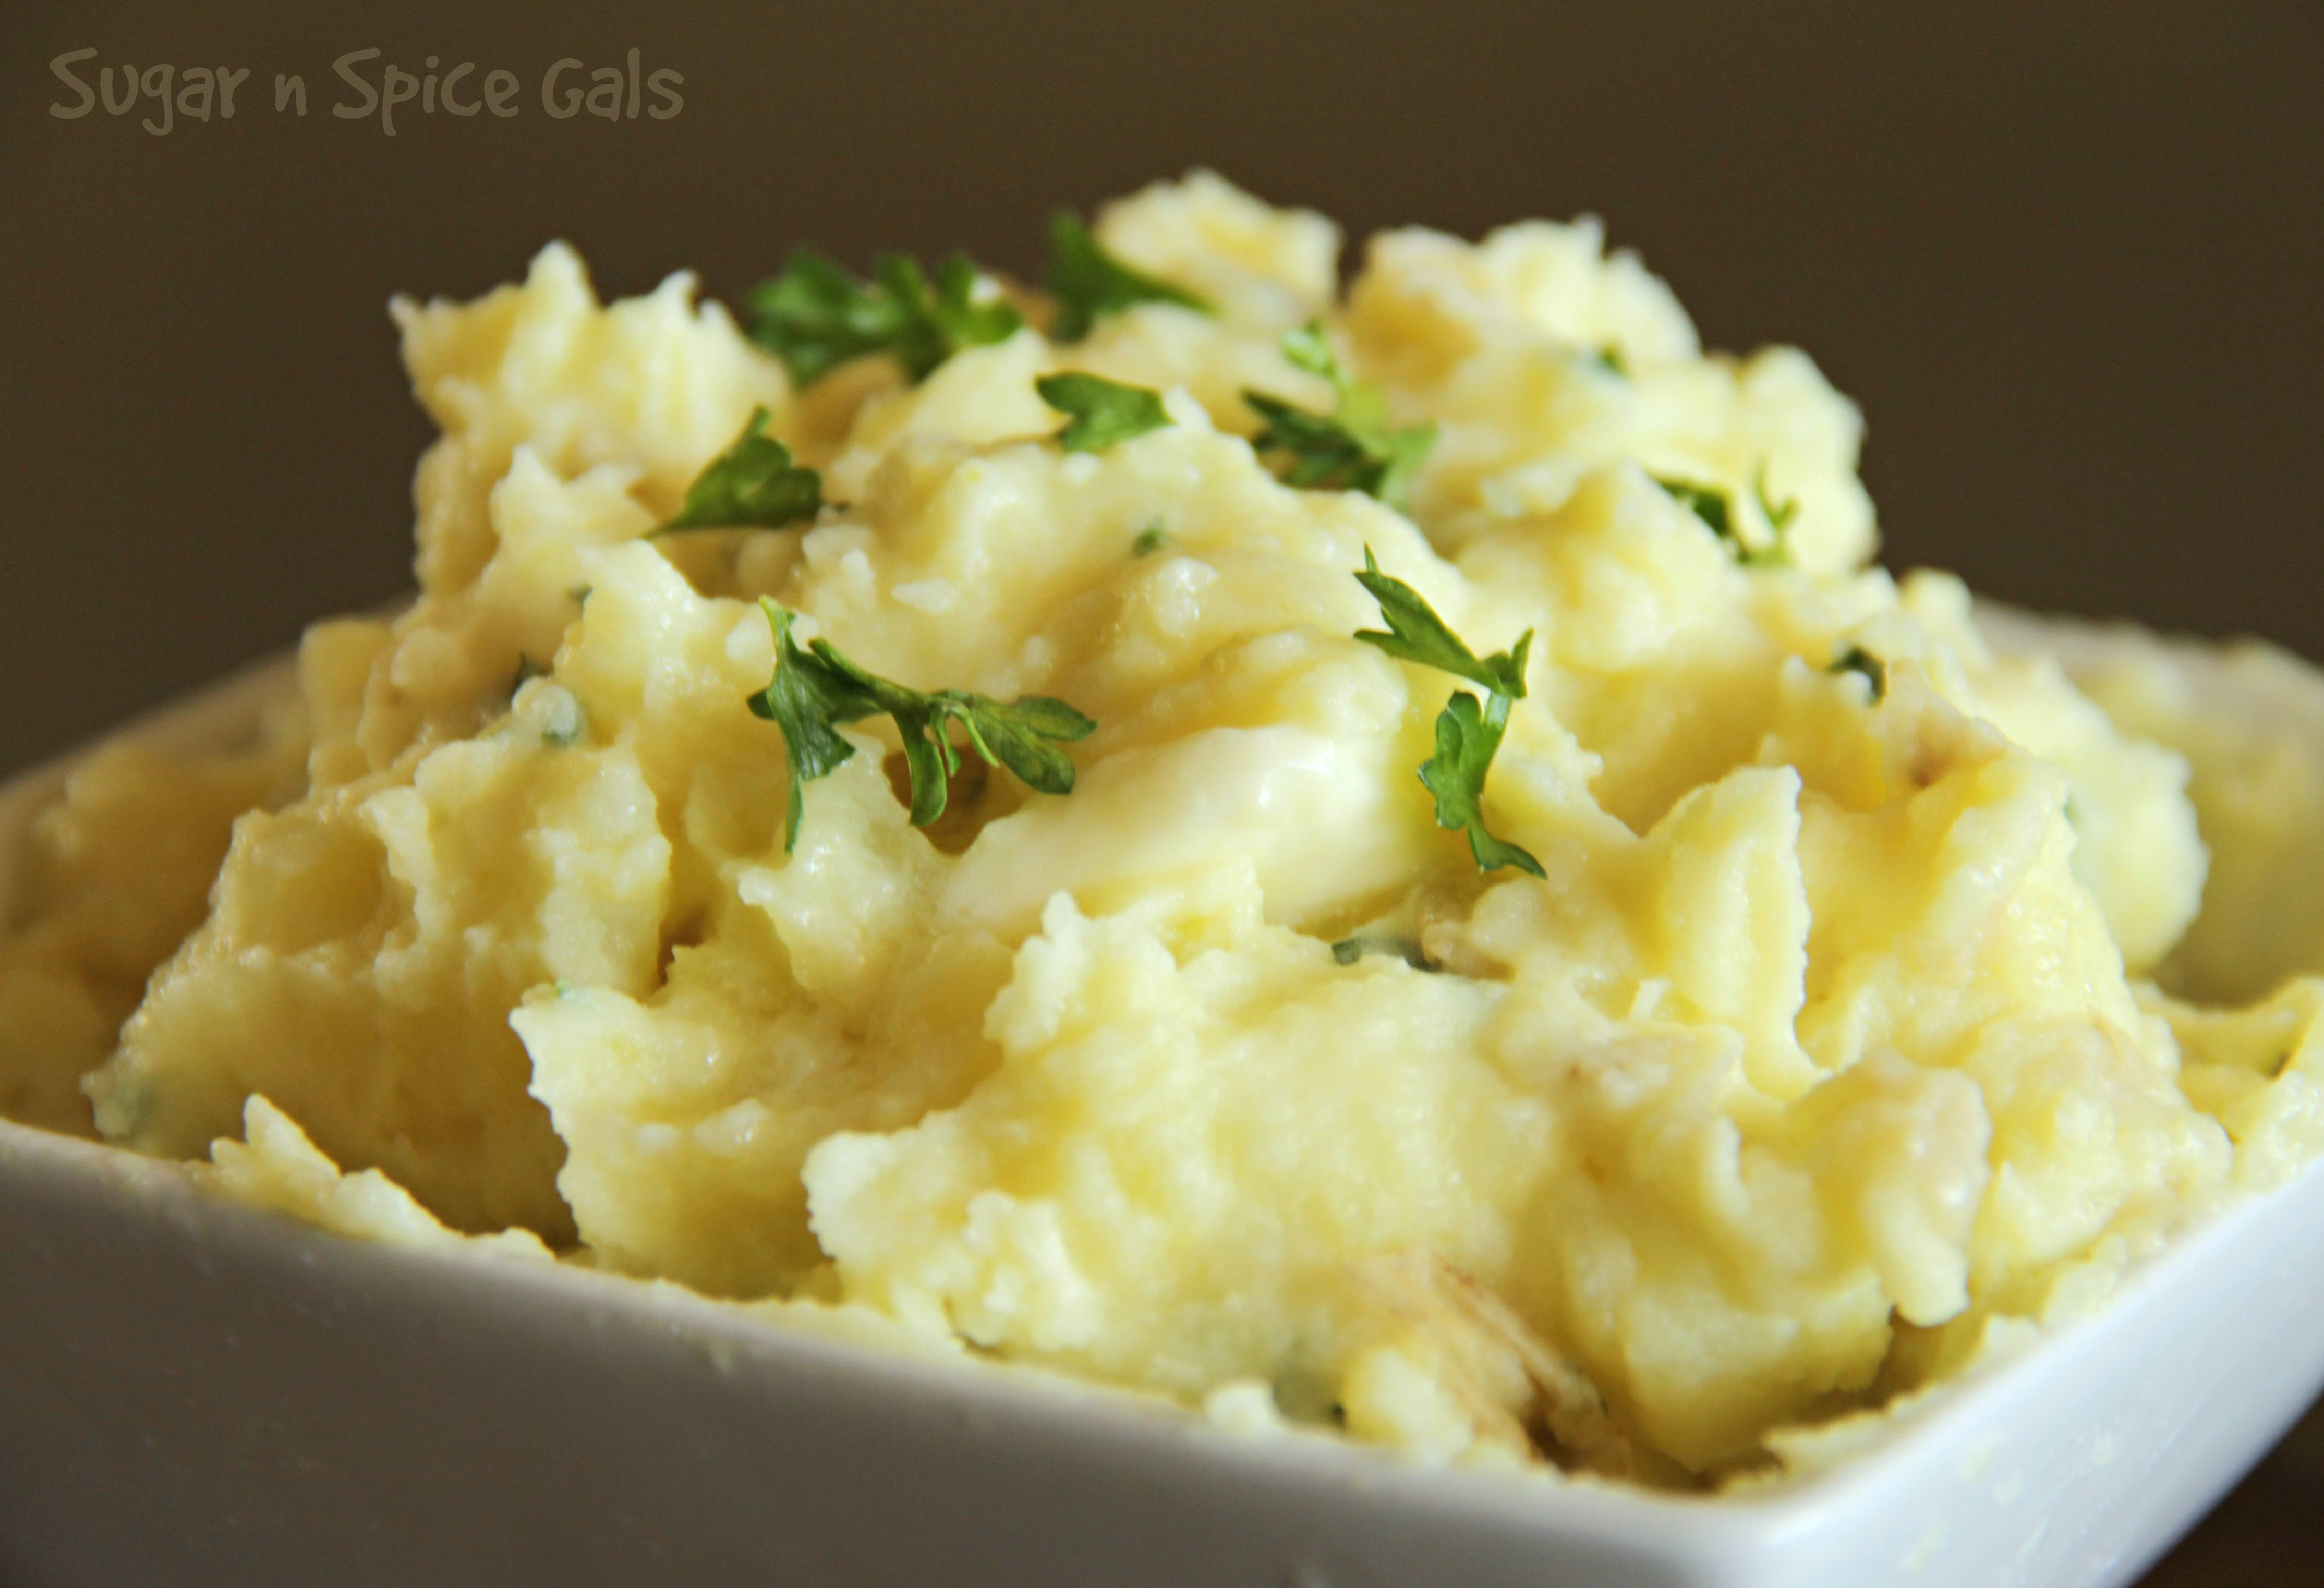 Mashed Potatoes With Sour Cream
 Garlic and Sour Cream Mashed Potatoes Sugar n Spice Gals